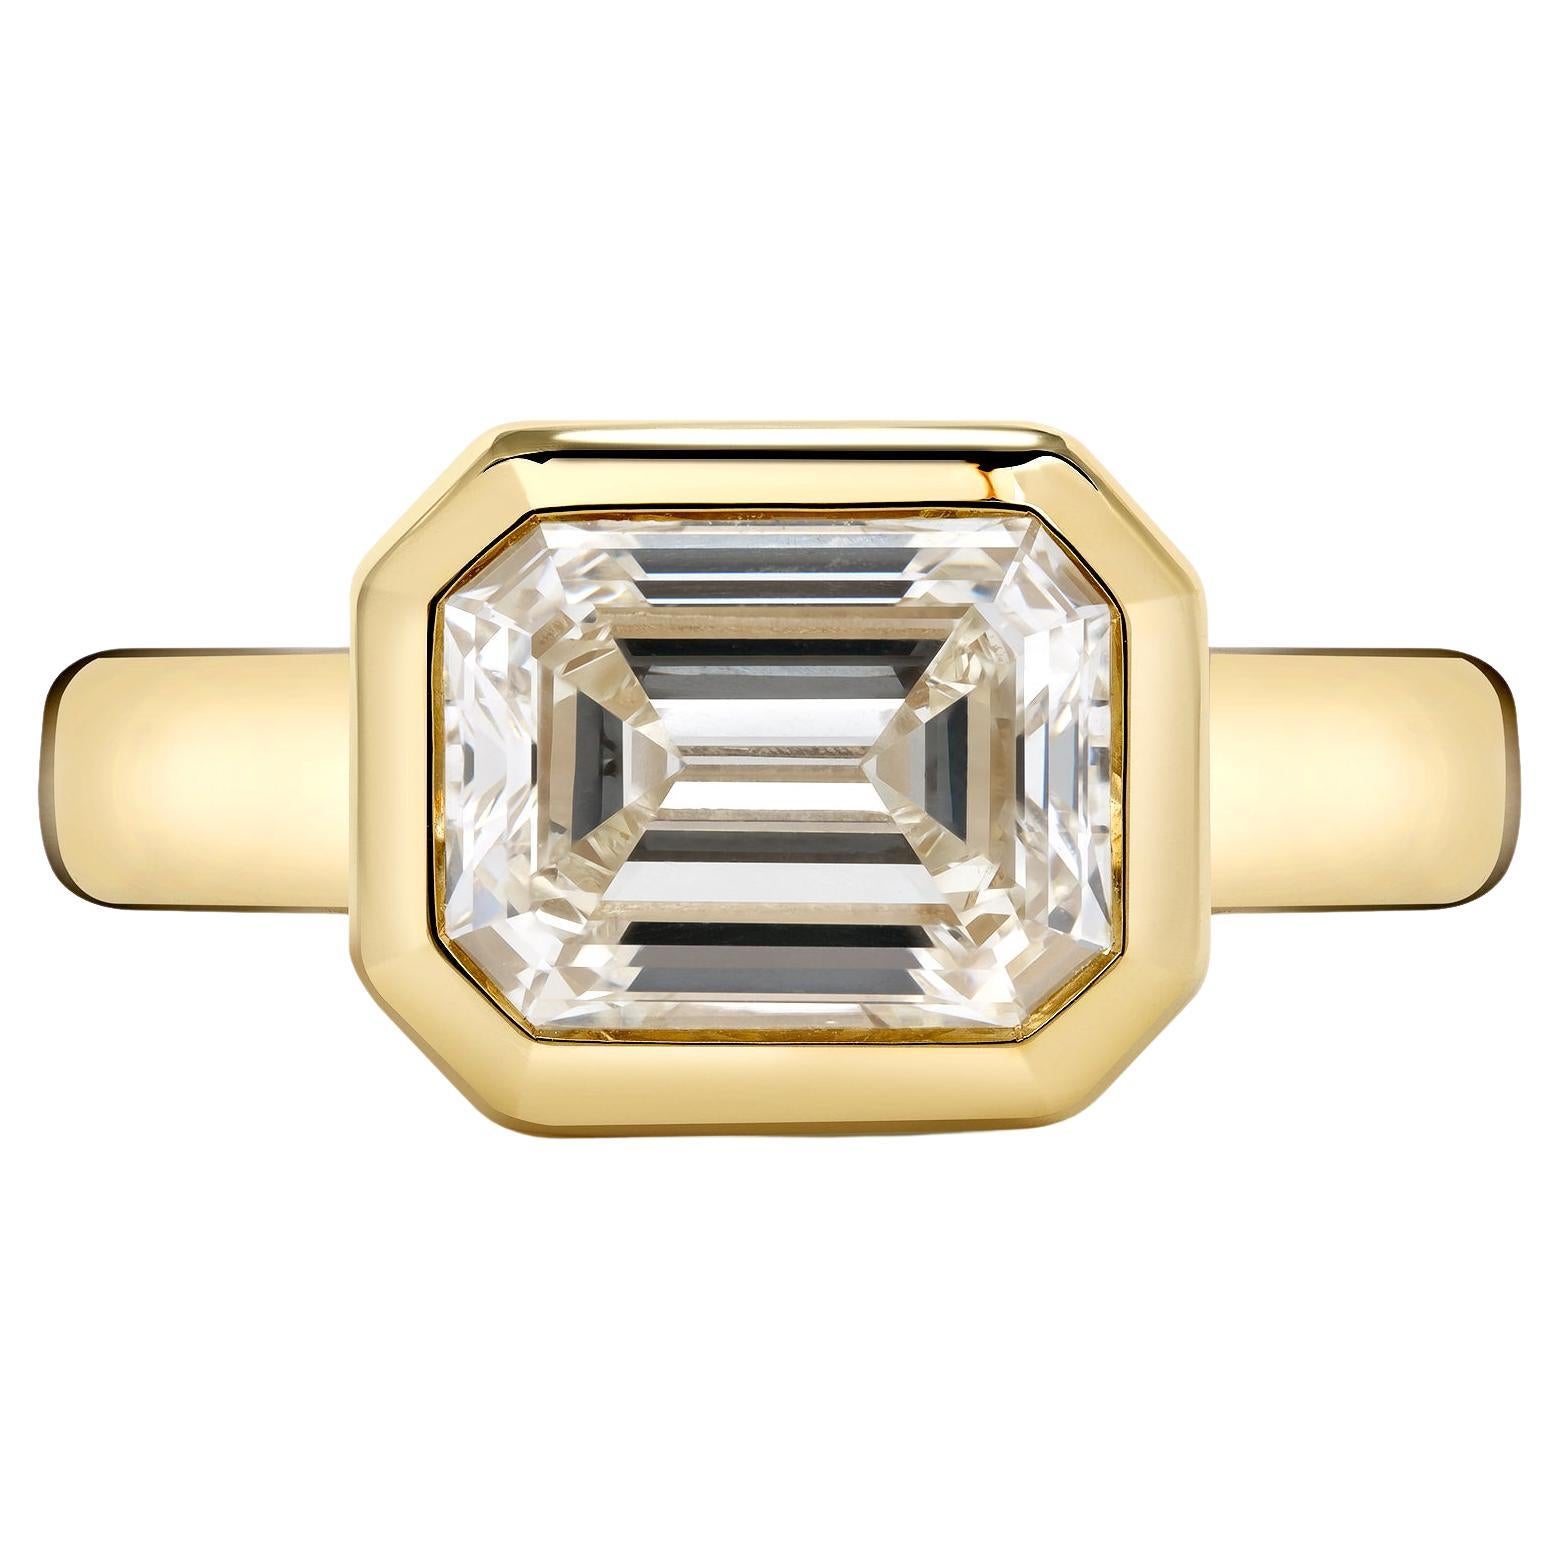 Handcrafted Marni Emerald Cut Diamond Ring by Single Stone For Sale